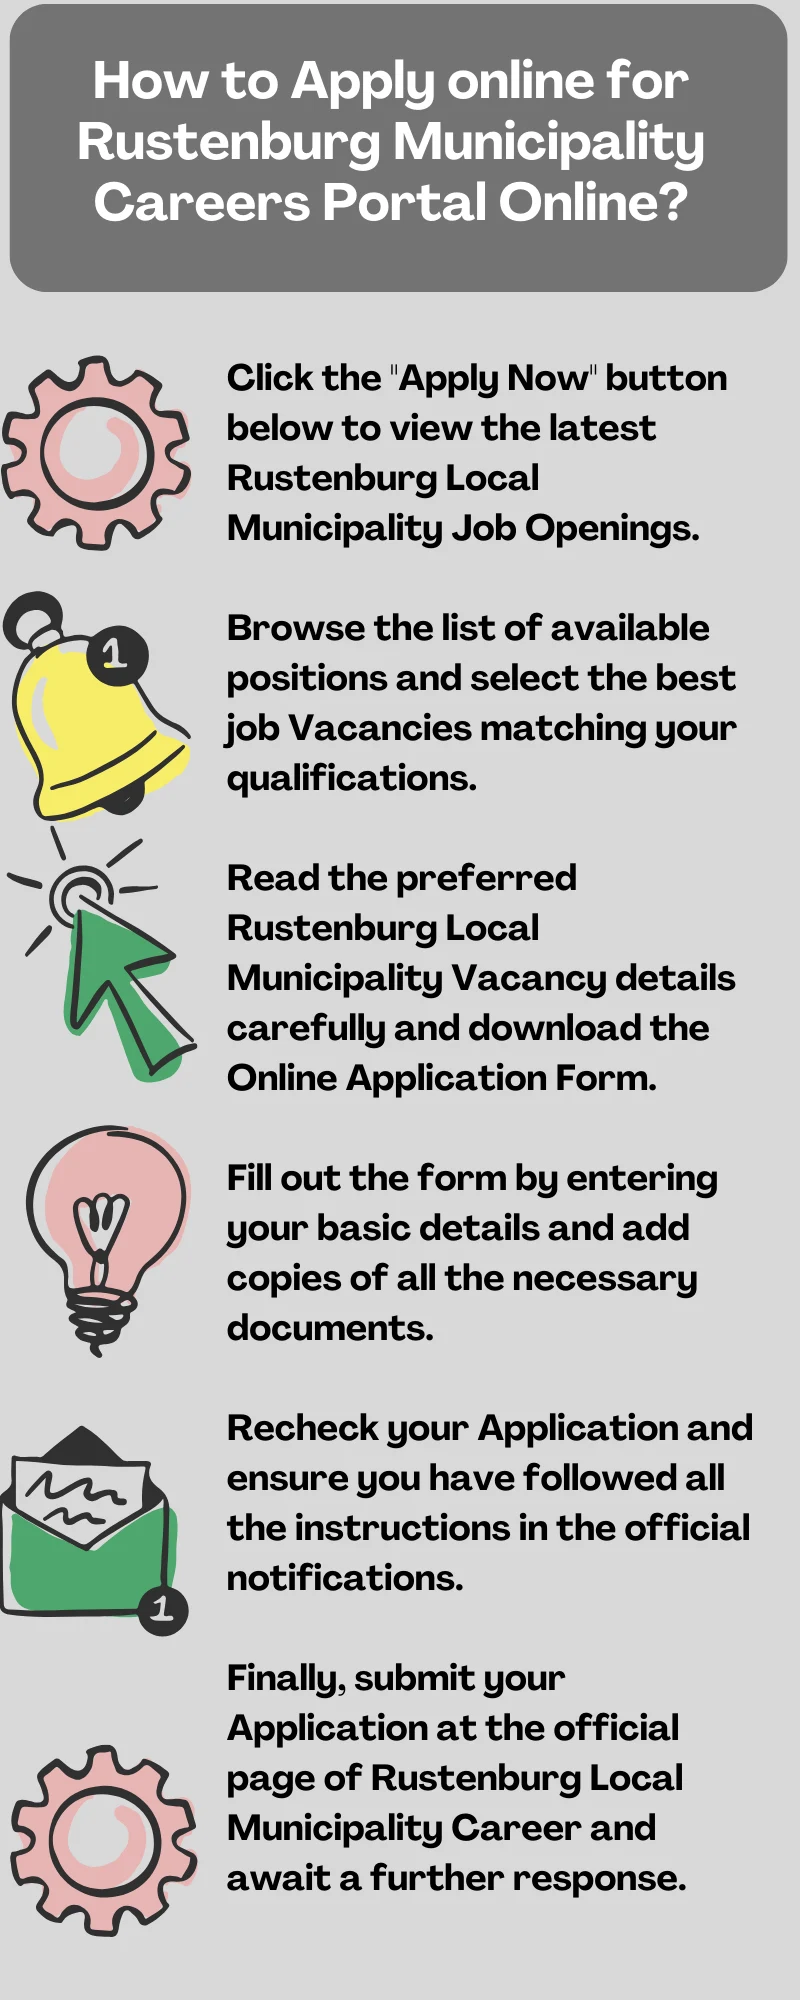 How to Apply online for Rustenburg Municipality Careers Portal Online?